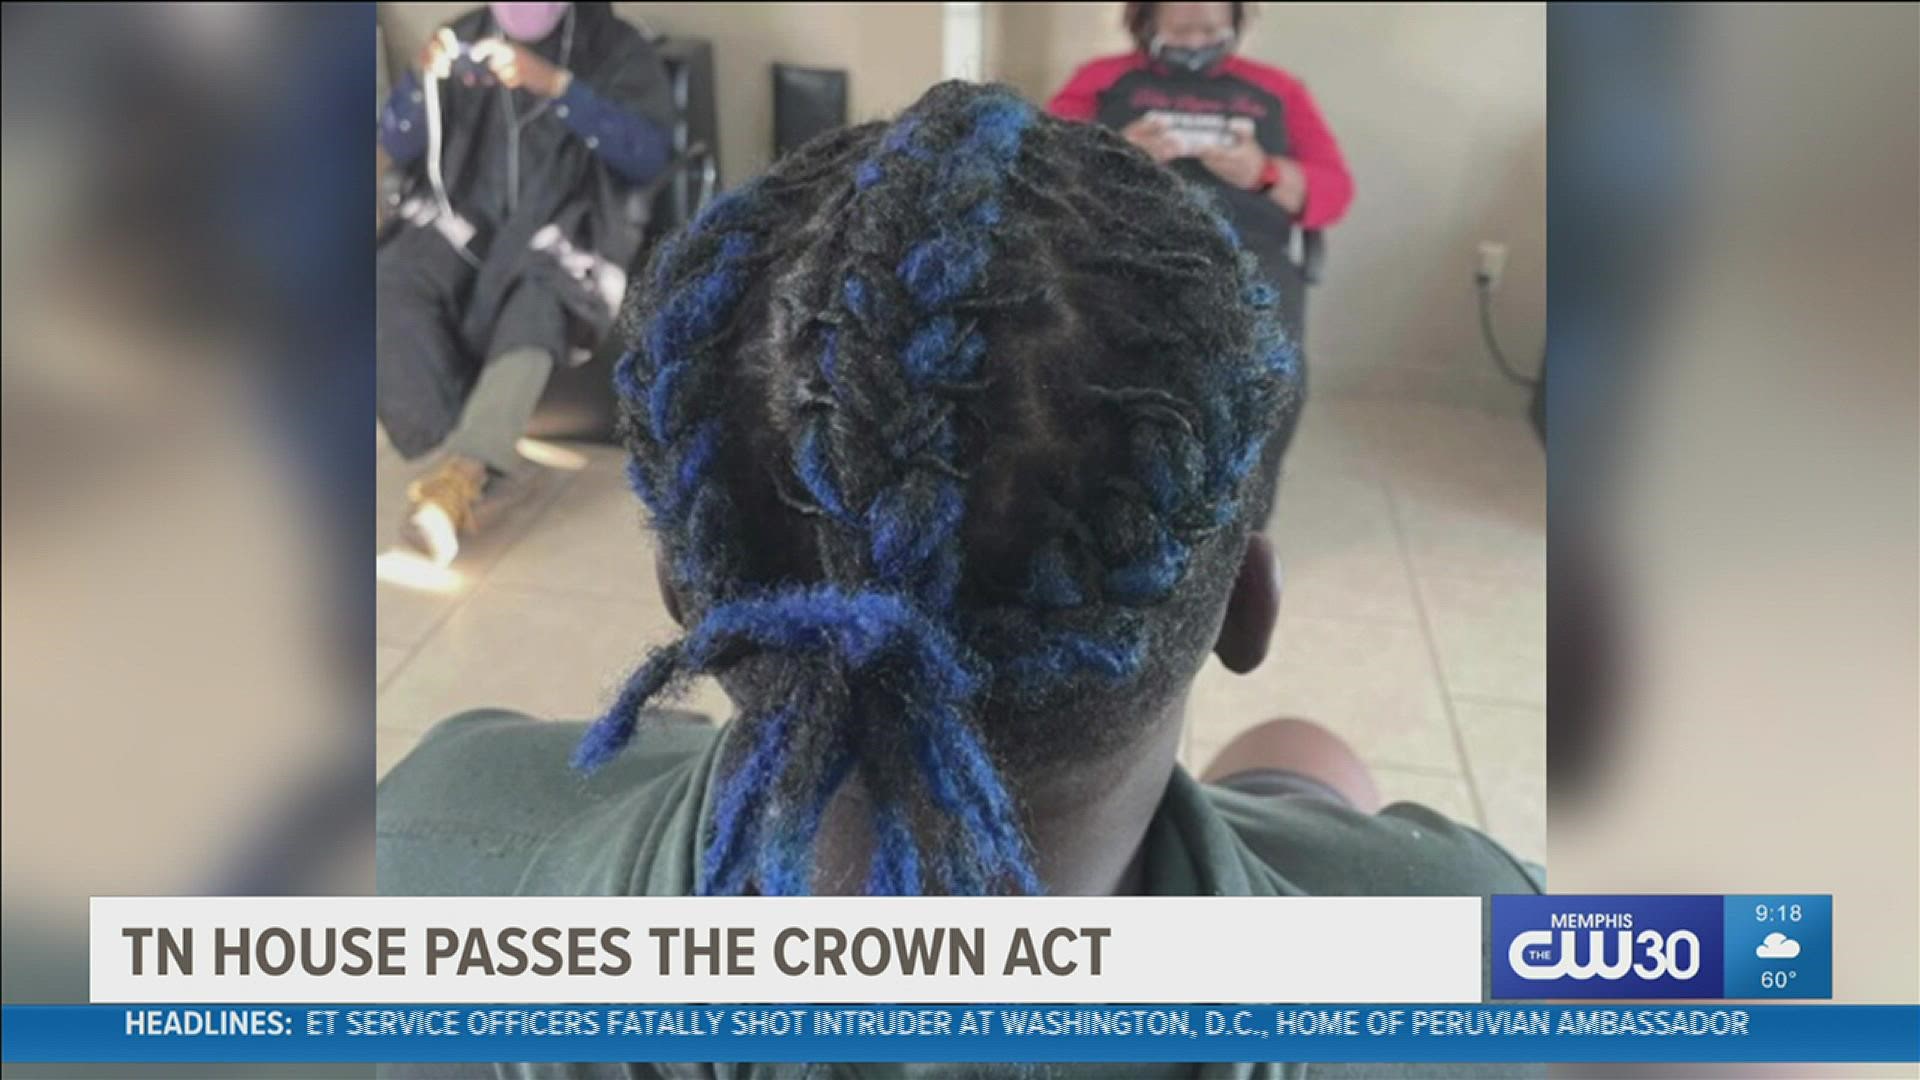 The CROWN Act stands for "Creating a Respectful and Open World for Natural hair" and would prevent employers from adopting policies against some hairstyles.